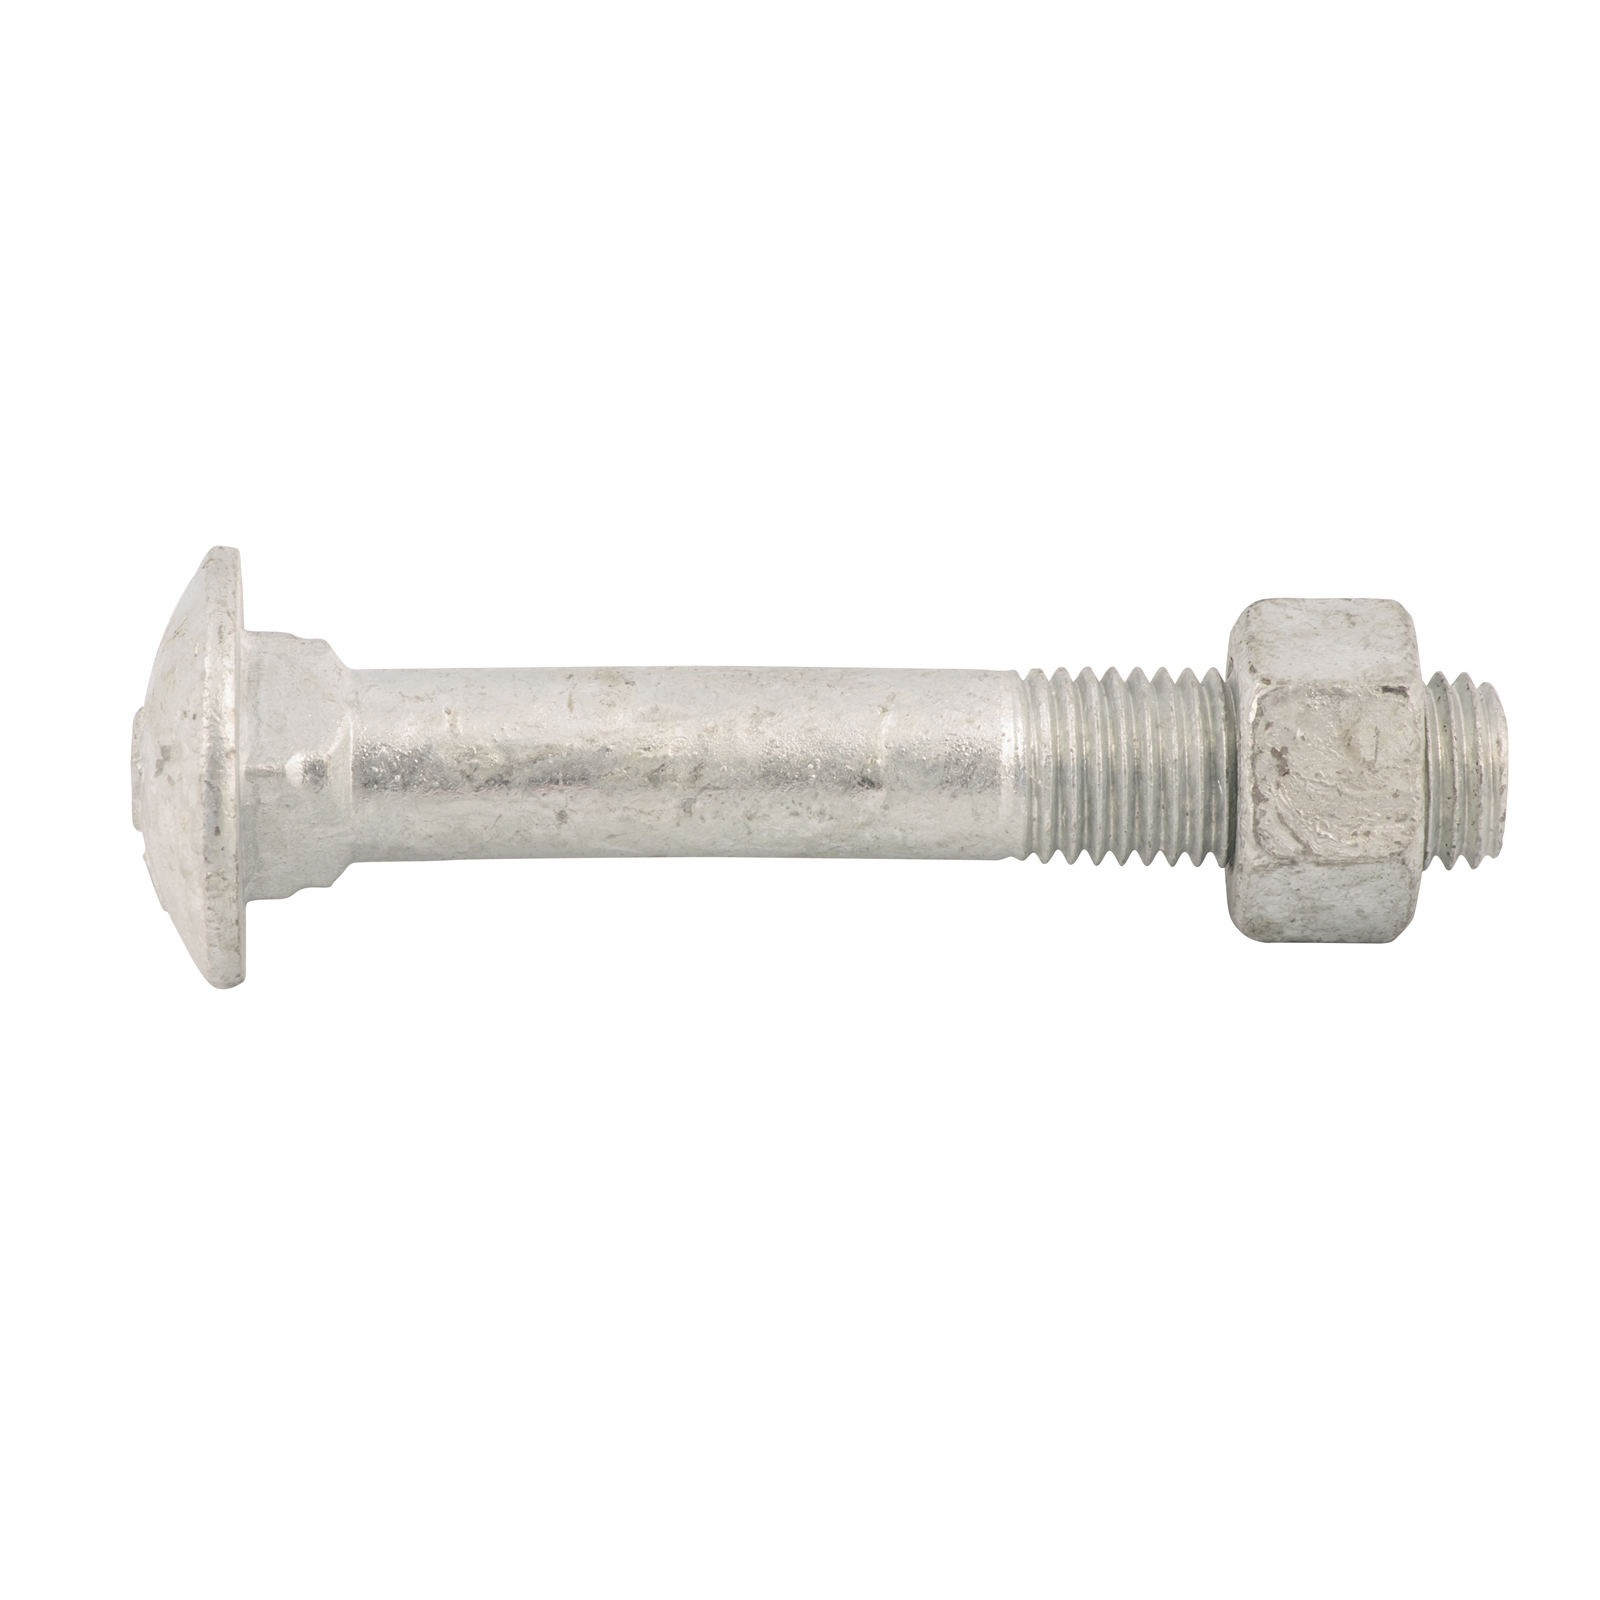 Zenith M16 x 100mm Galvanised Cup Head Bolt and Nut